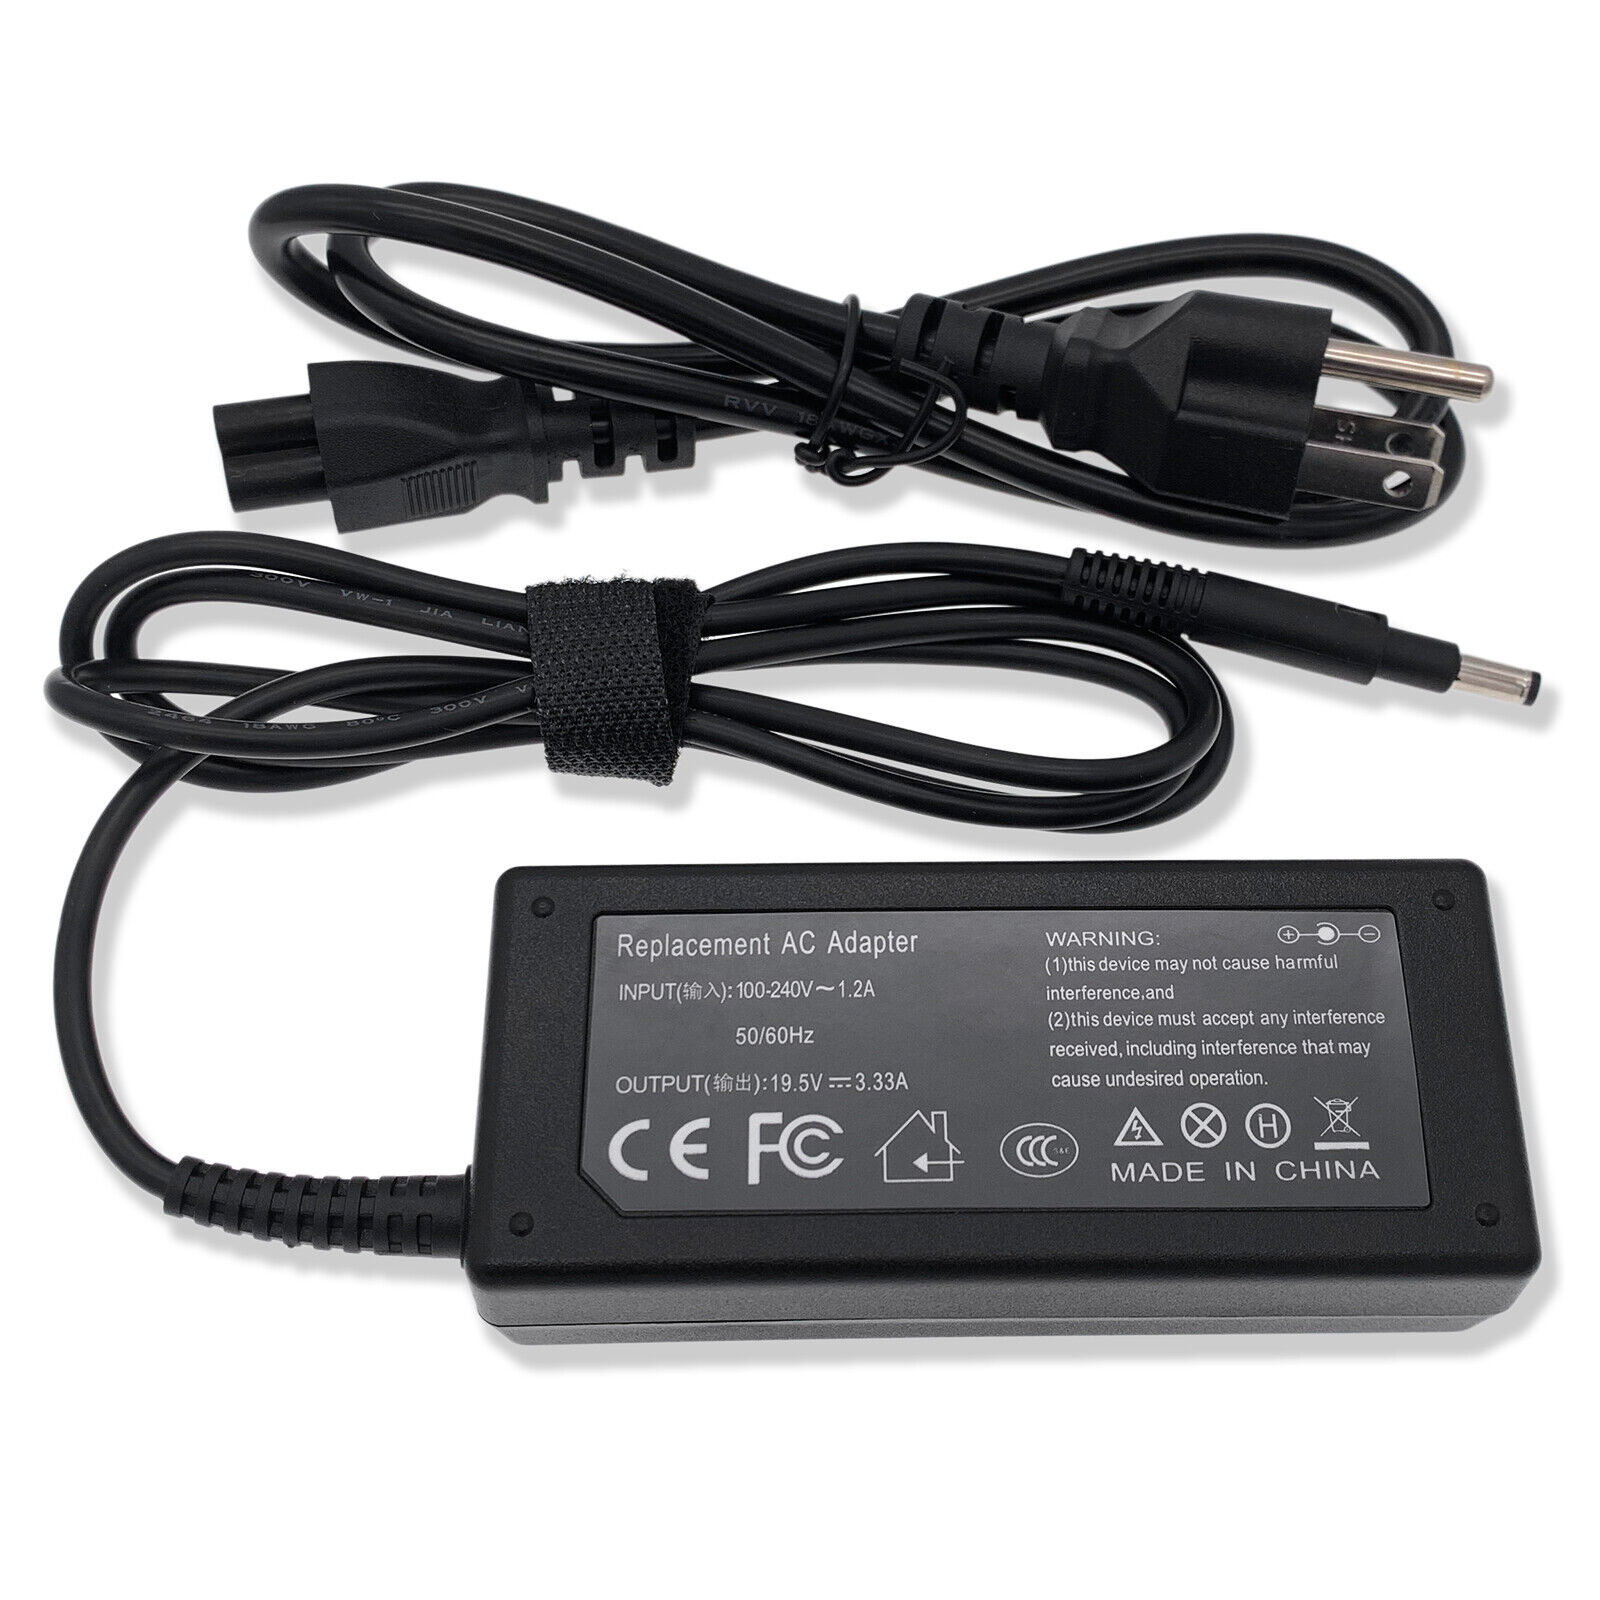 AC Adapter For HP Pavilion 15-B119wm D8X45UA#ABA Laptop Charger Power Supply